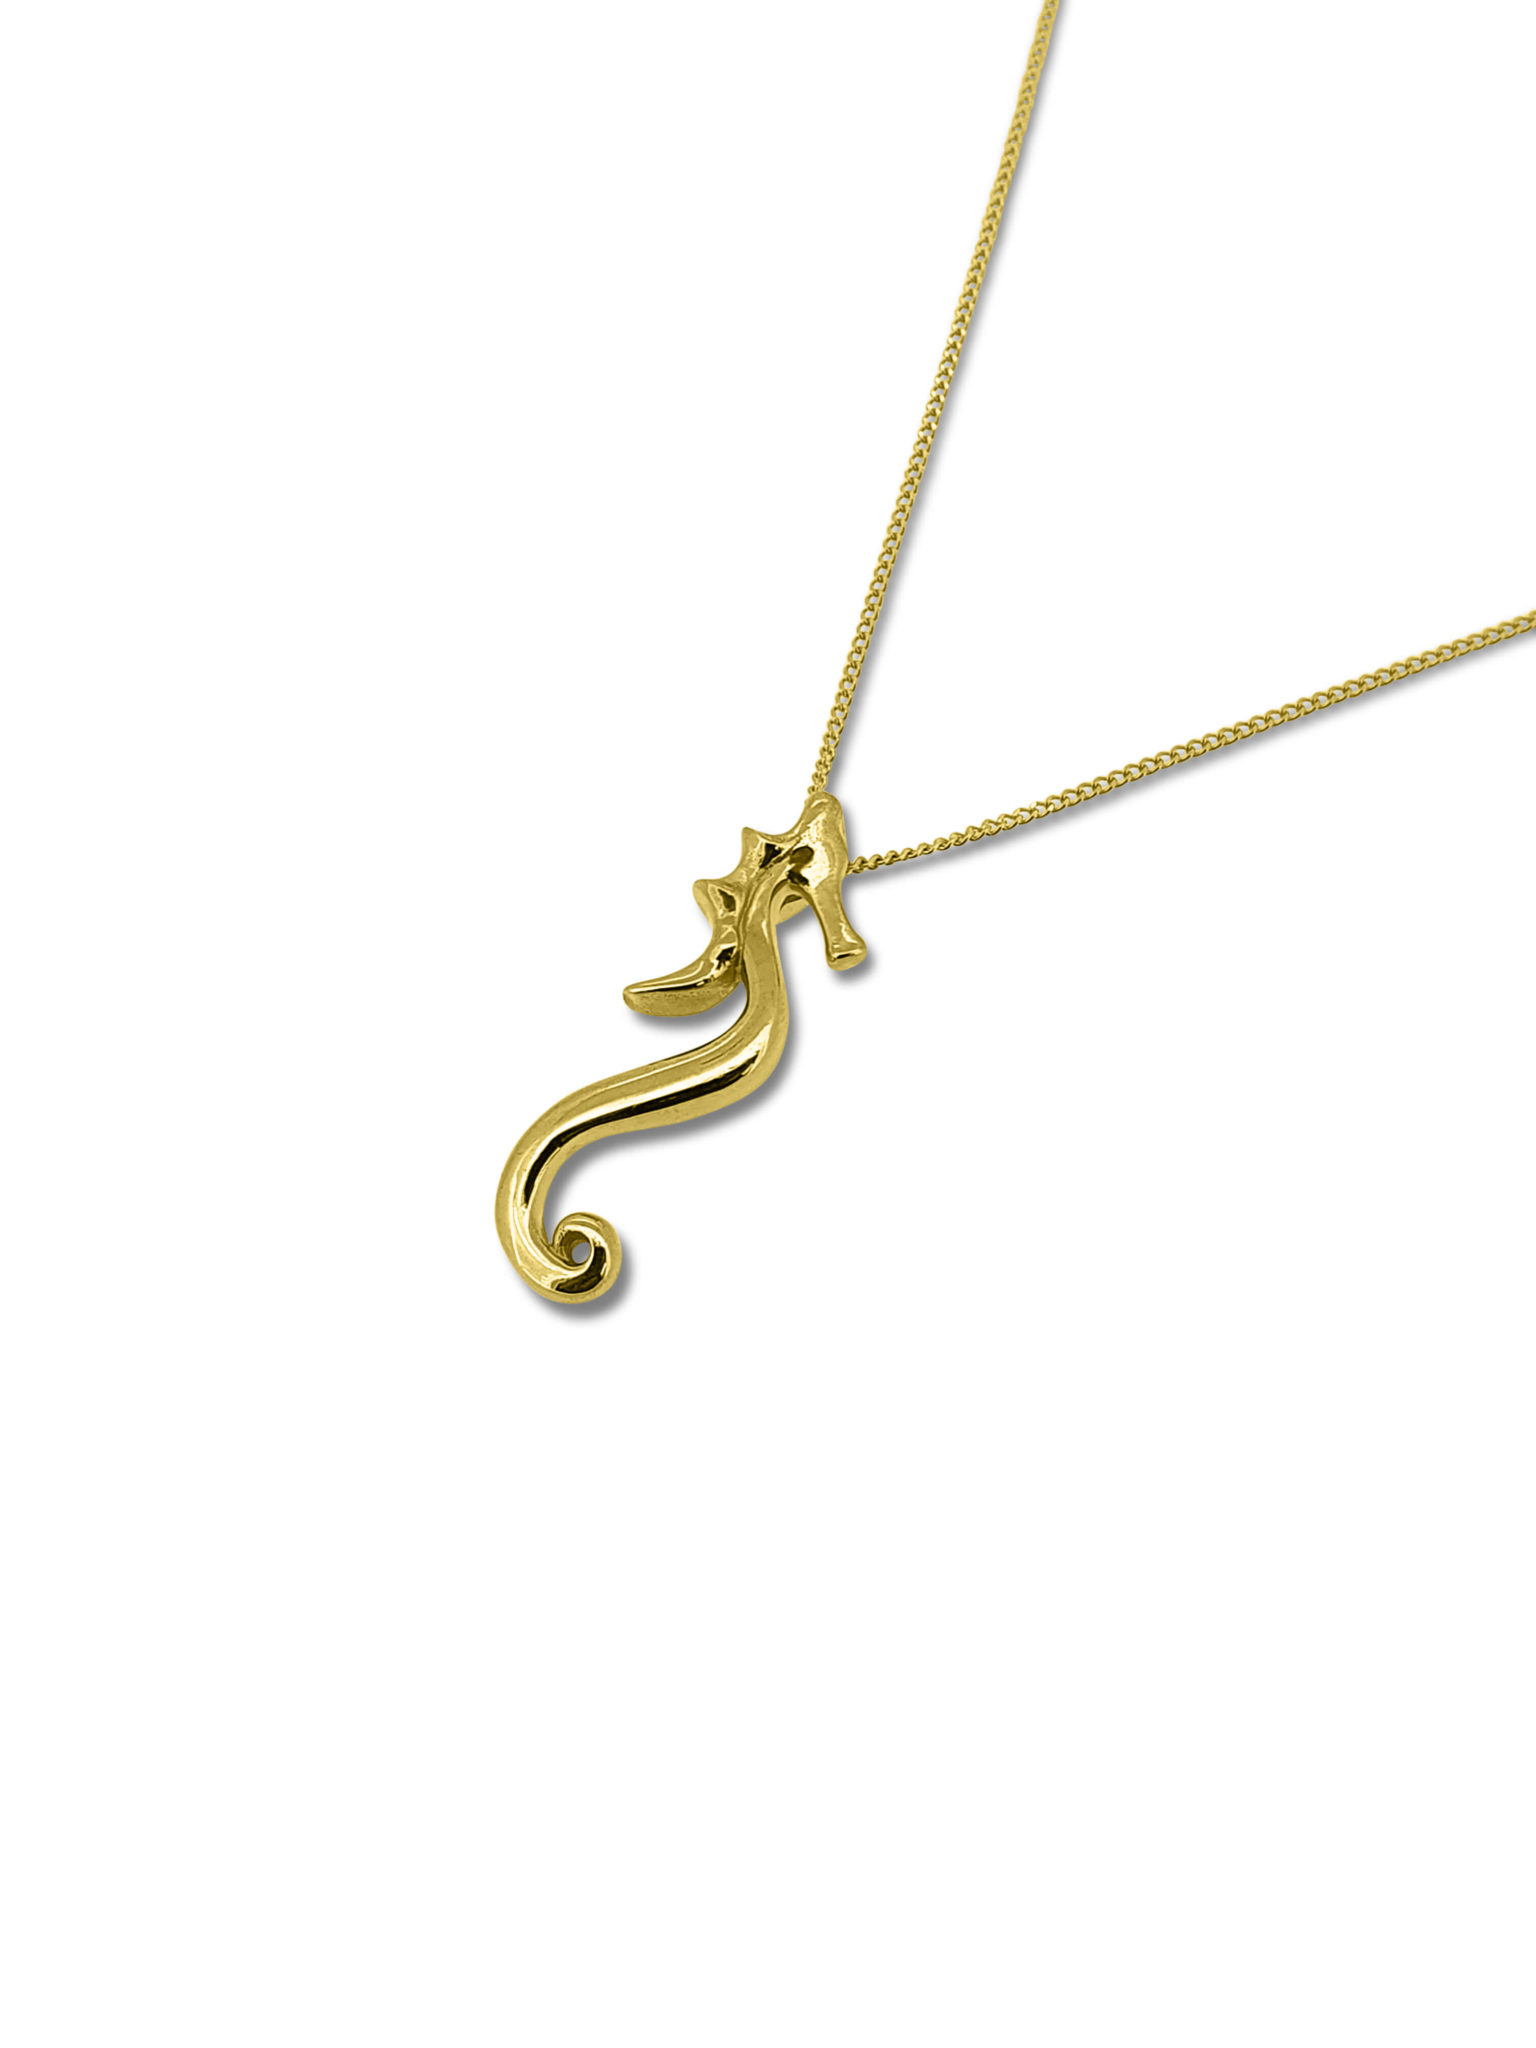 Mike Taylor Handmade Solid 9ct Yellow Gold Seahorse Pendant and Chain ...